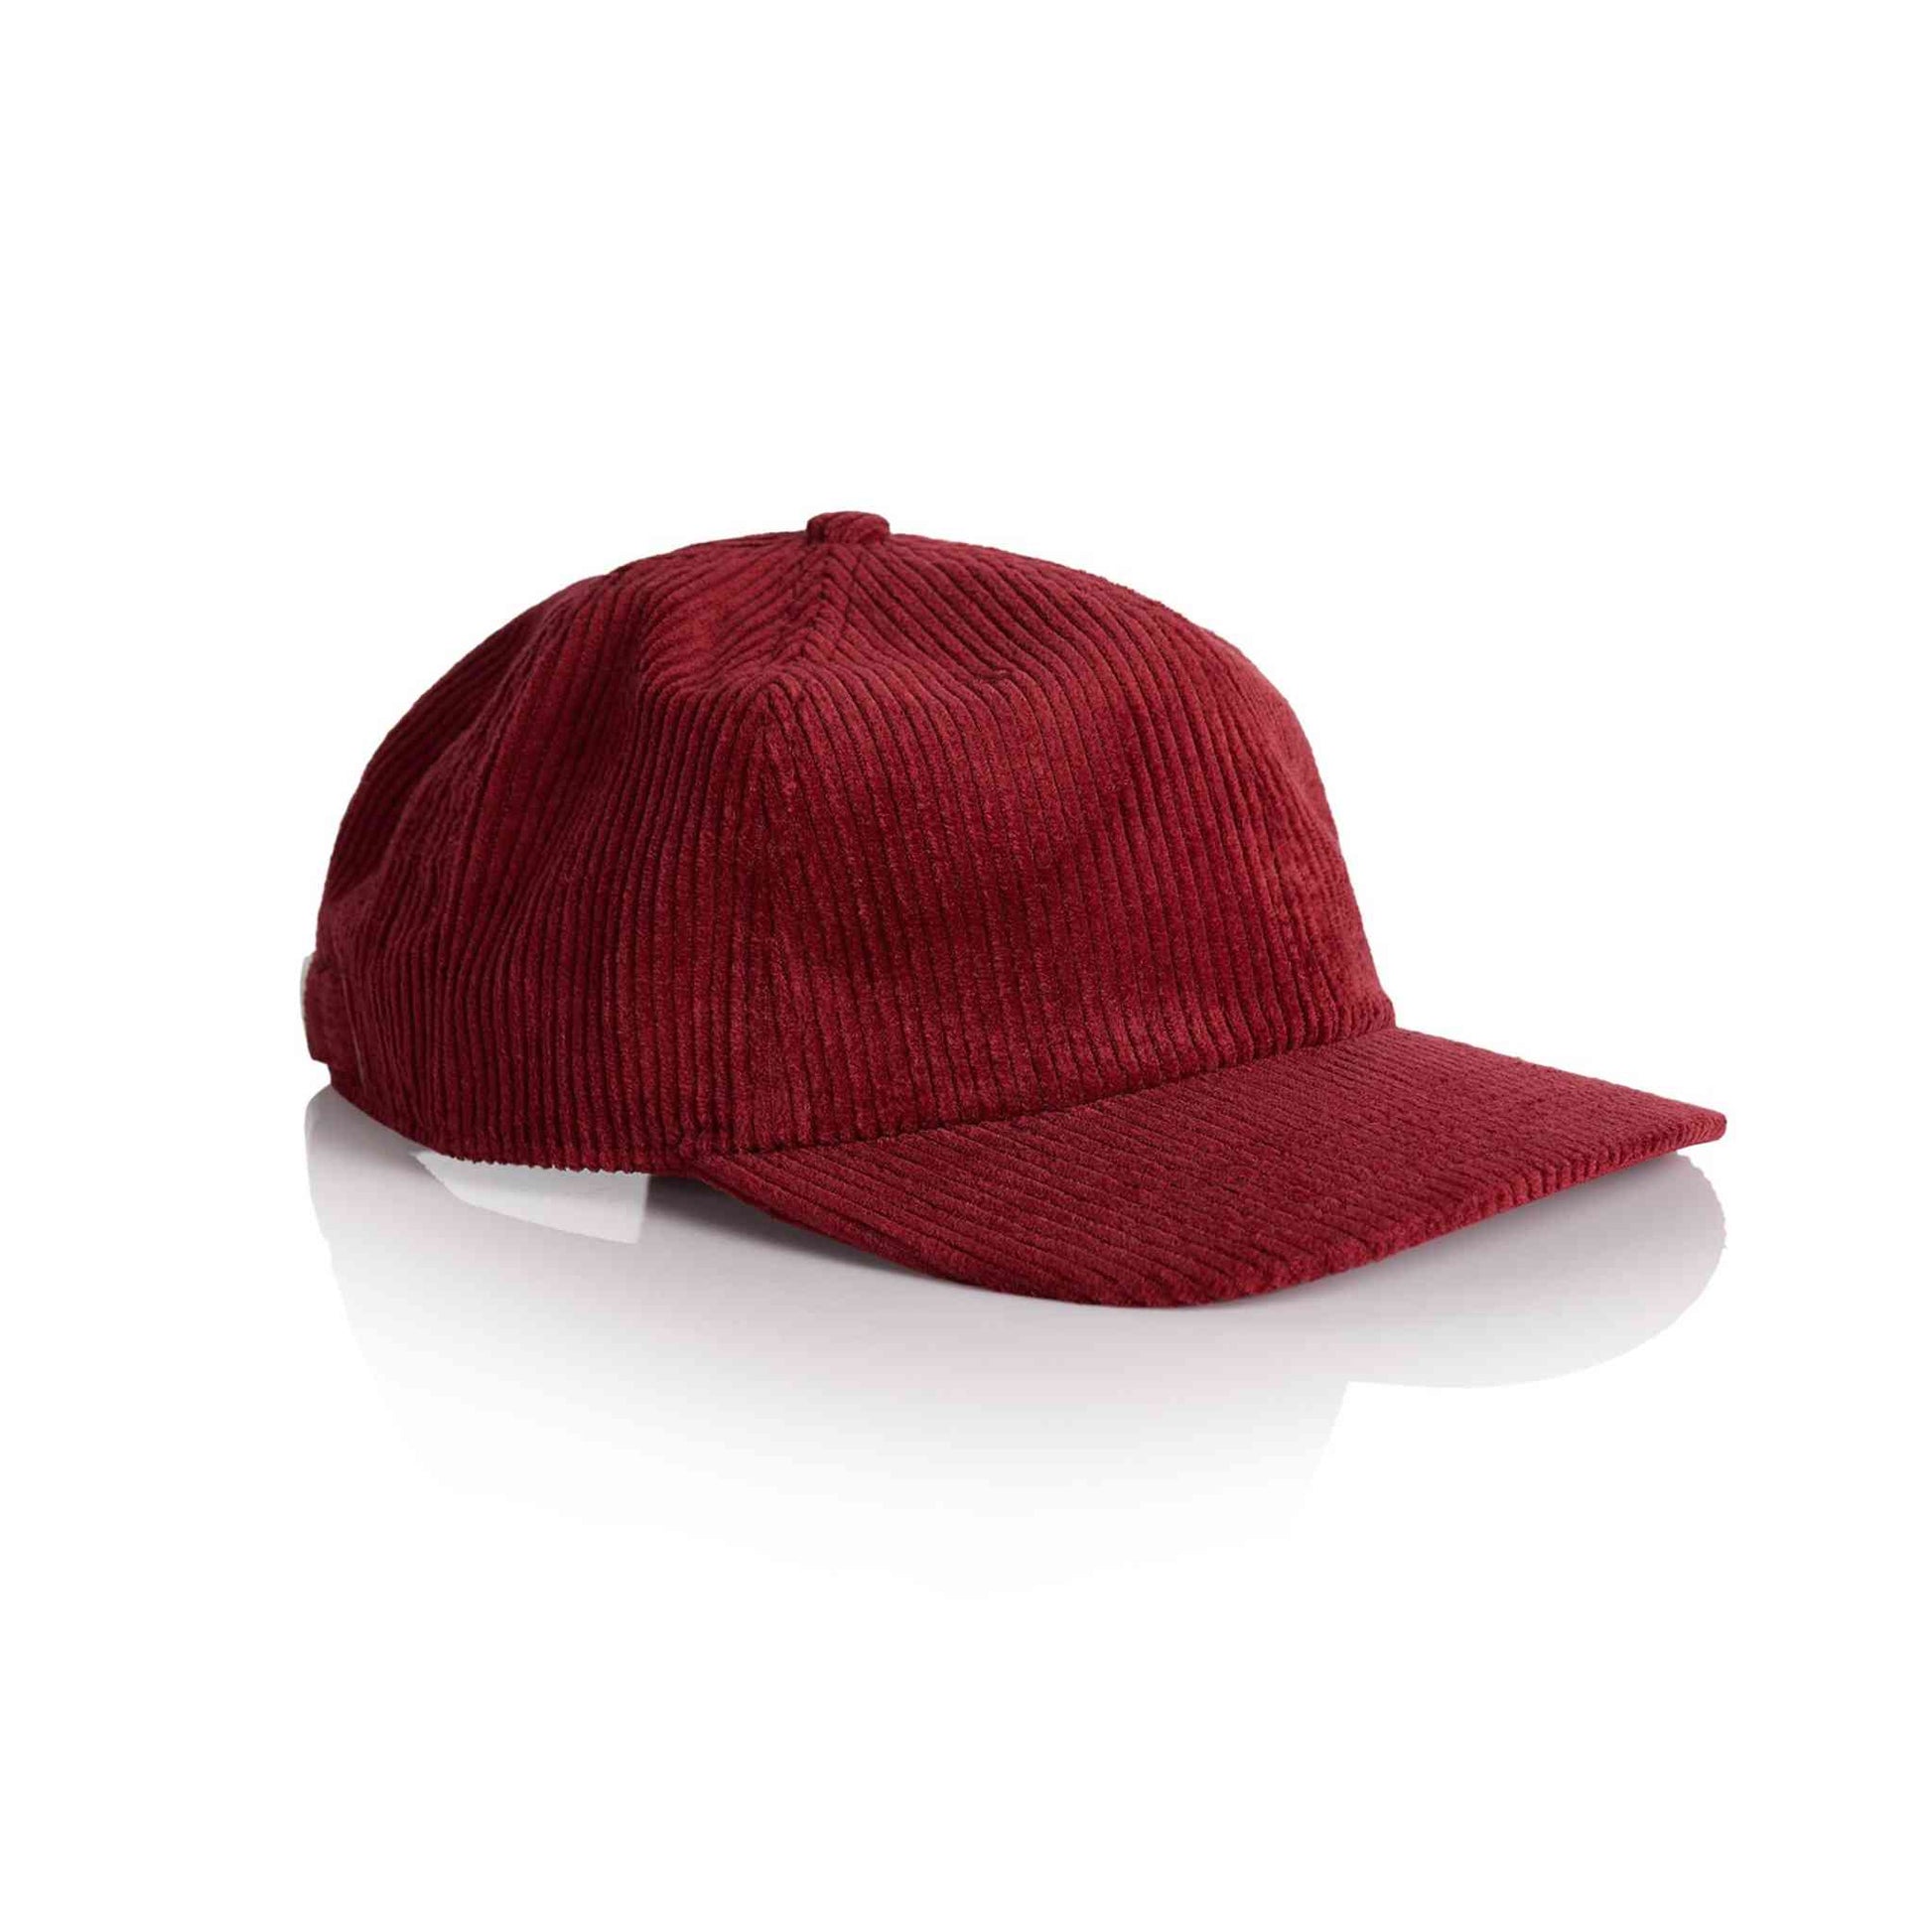 AS Colour 1119 Cord six panel cap in cardinal side profile.